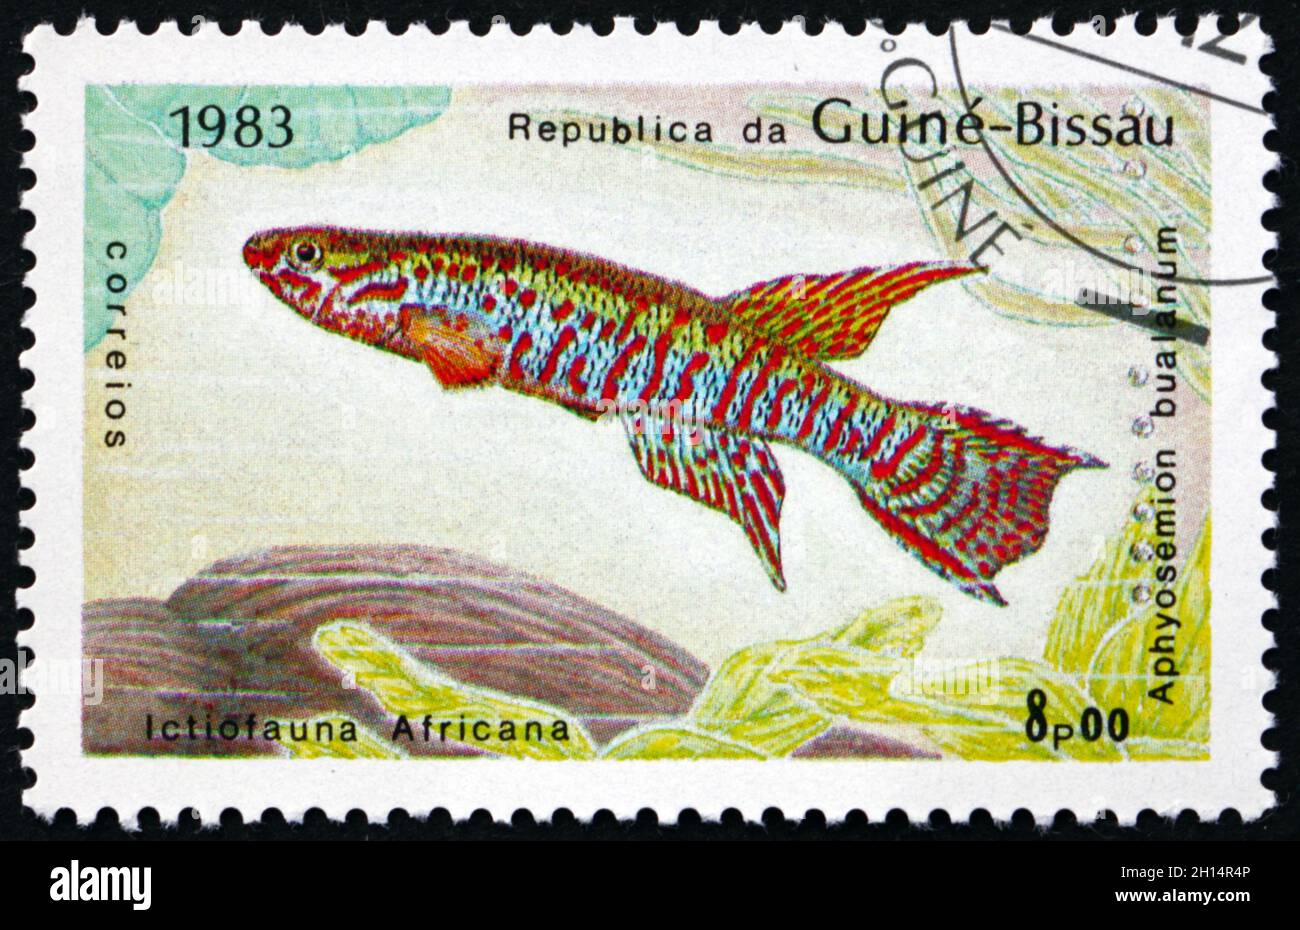 GUINEA-BISSAU - CIRCA 1983: a stamp printed in Guinea-Bissau shows Aphyosemion bualanum, is a species of African rivulines endemic to Africa, circa 19 Stock Photo